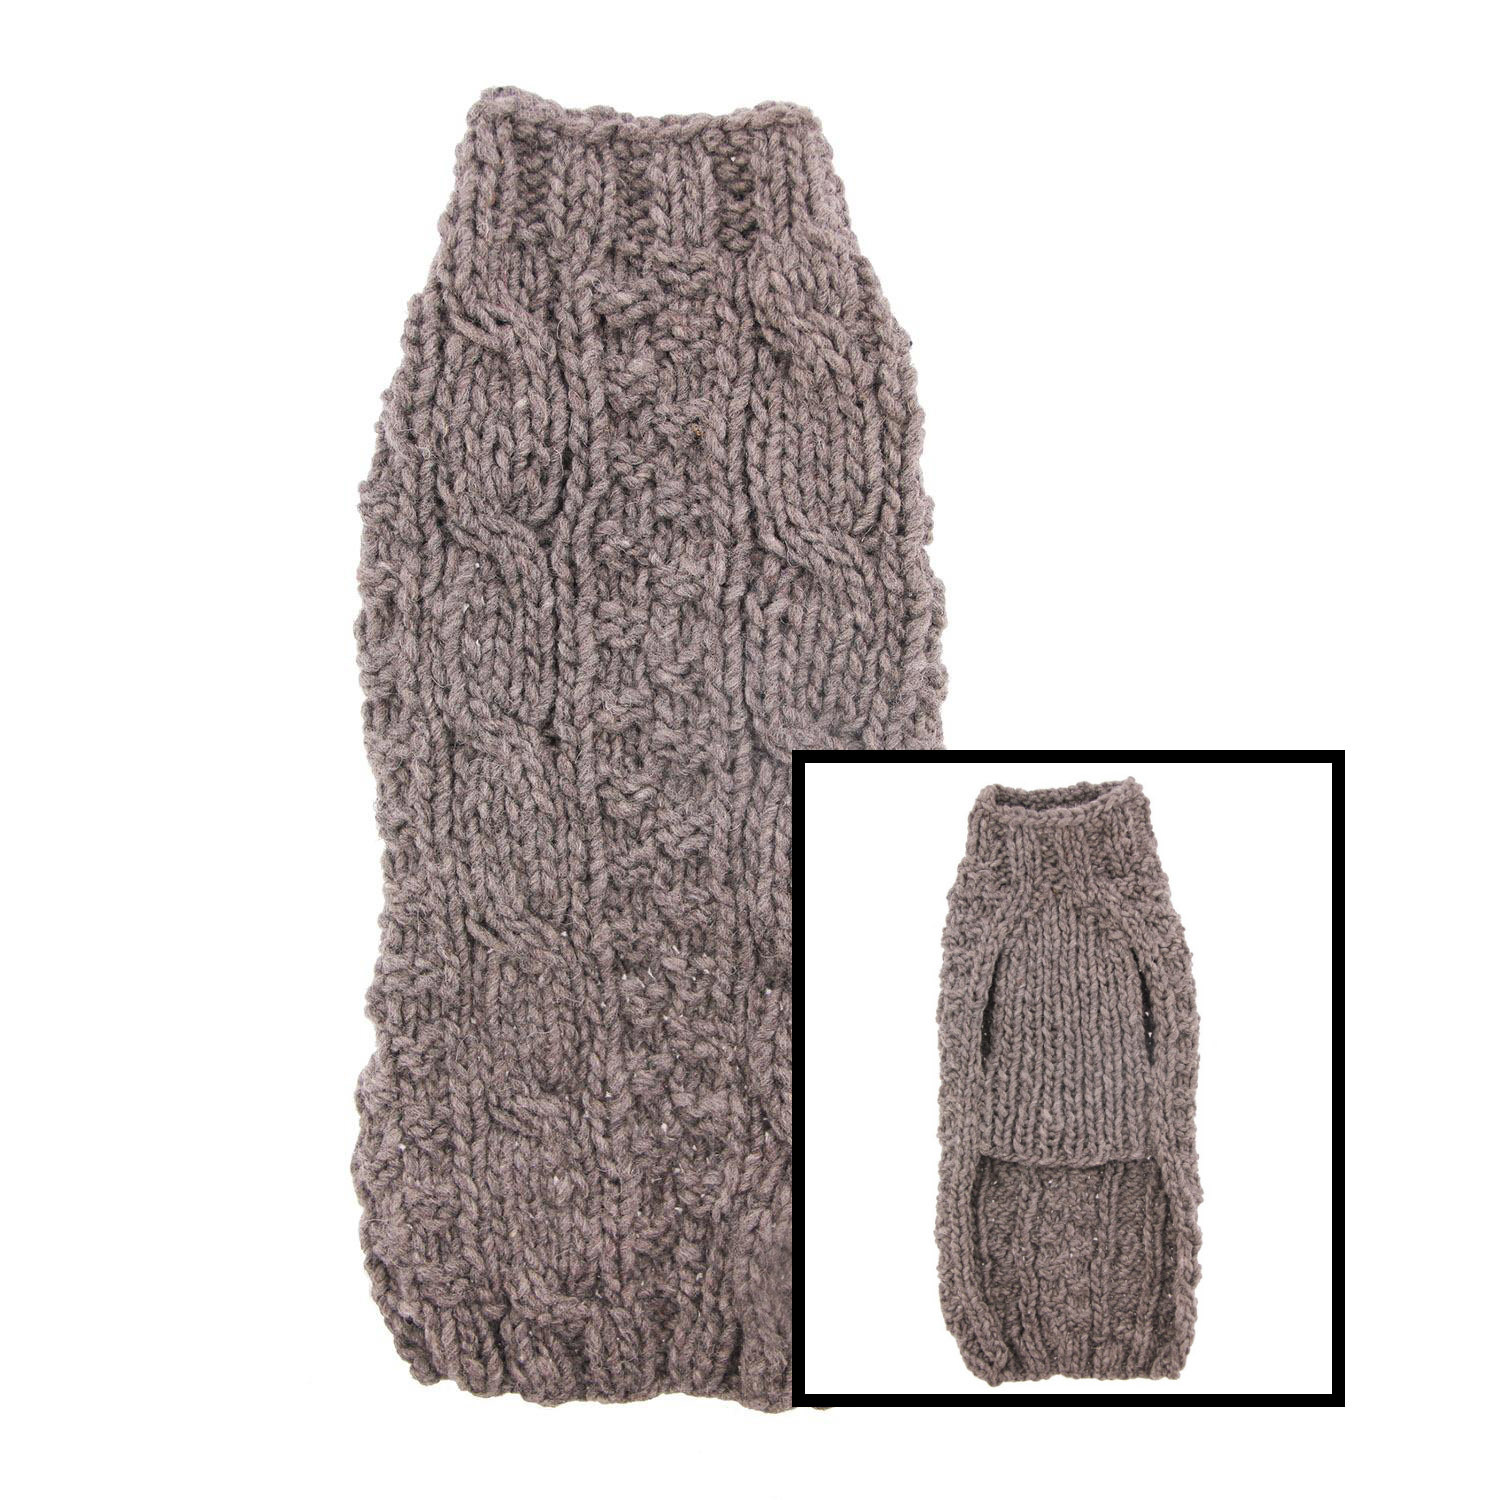 MISC PETS CHILLY CABLE KNIT DOG SWEATER - Grey